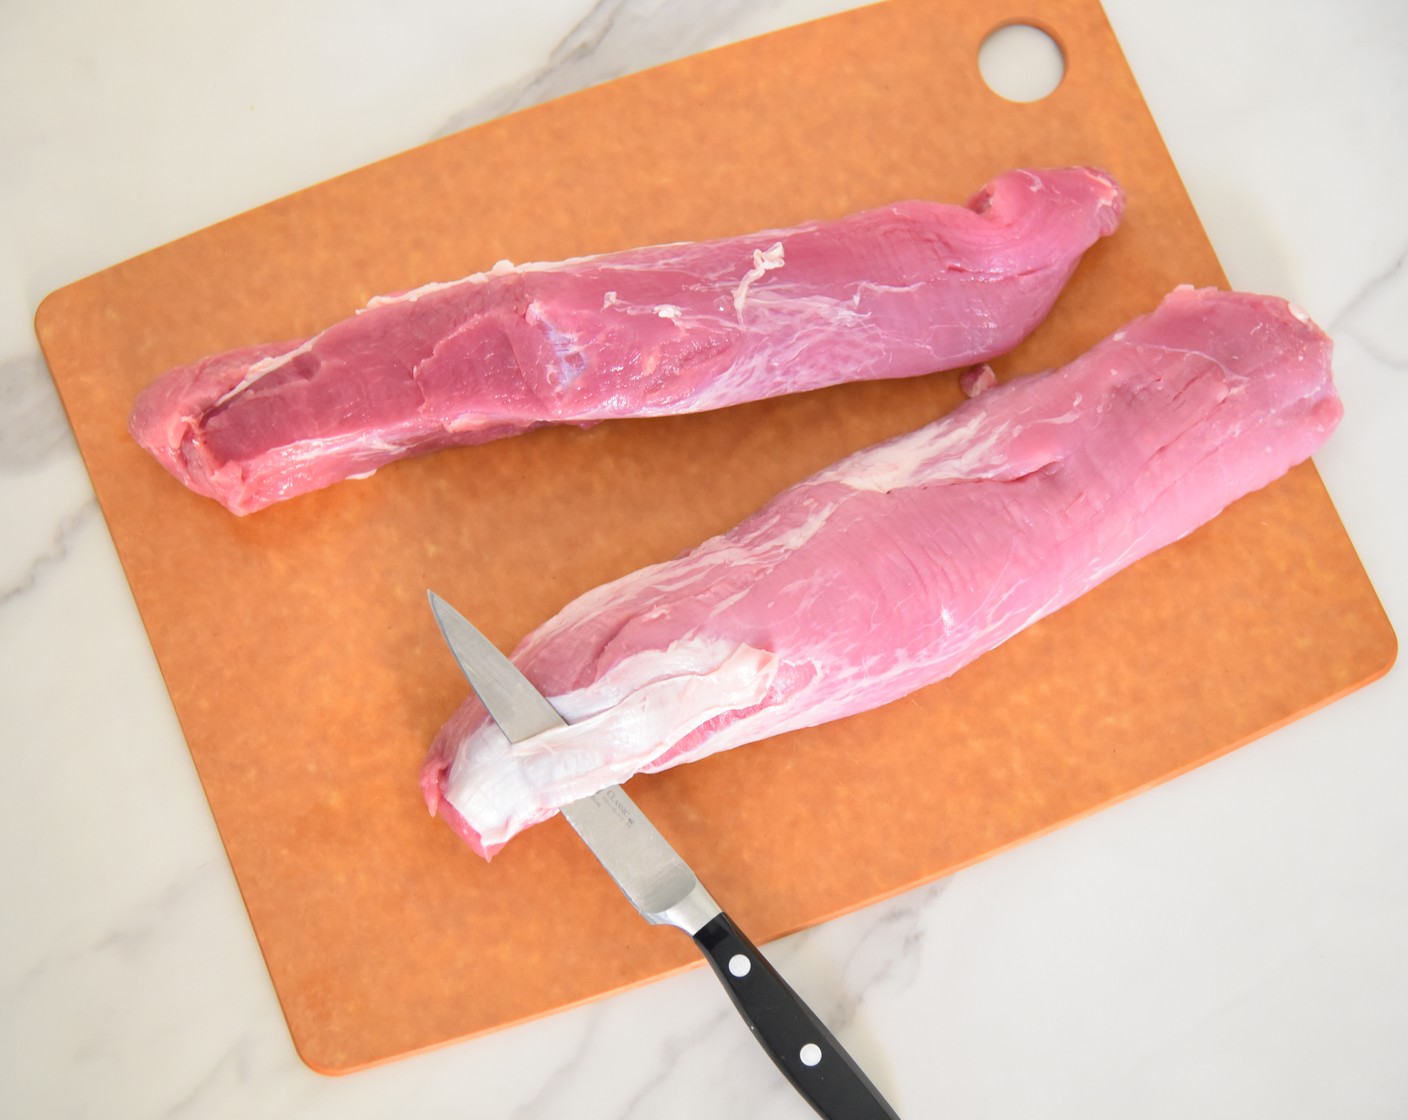 step 1 Place the Pork Tenderloin (1 pckg) on a cutting board. Pat the tenderloins dry with paper towels. Using a pairing knife, insert the knife under the silver skin on the tenderloin and slice along the meat to cut away any silver skin on the tenderloin. Each tenderloin will have a small spot of silver skin.